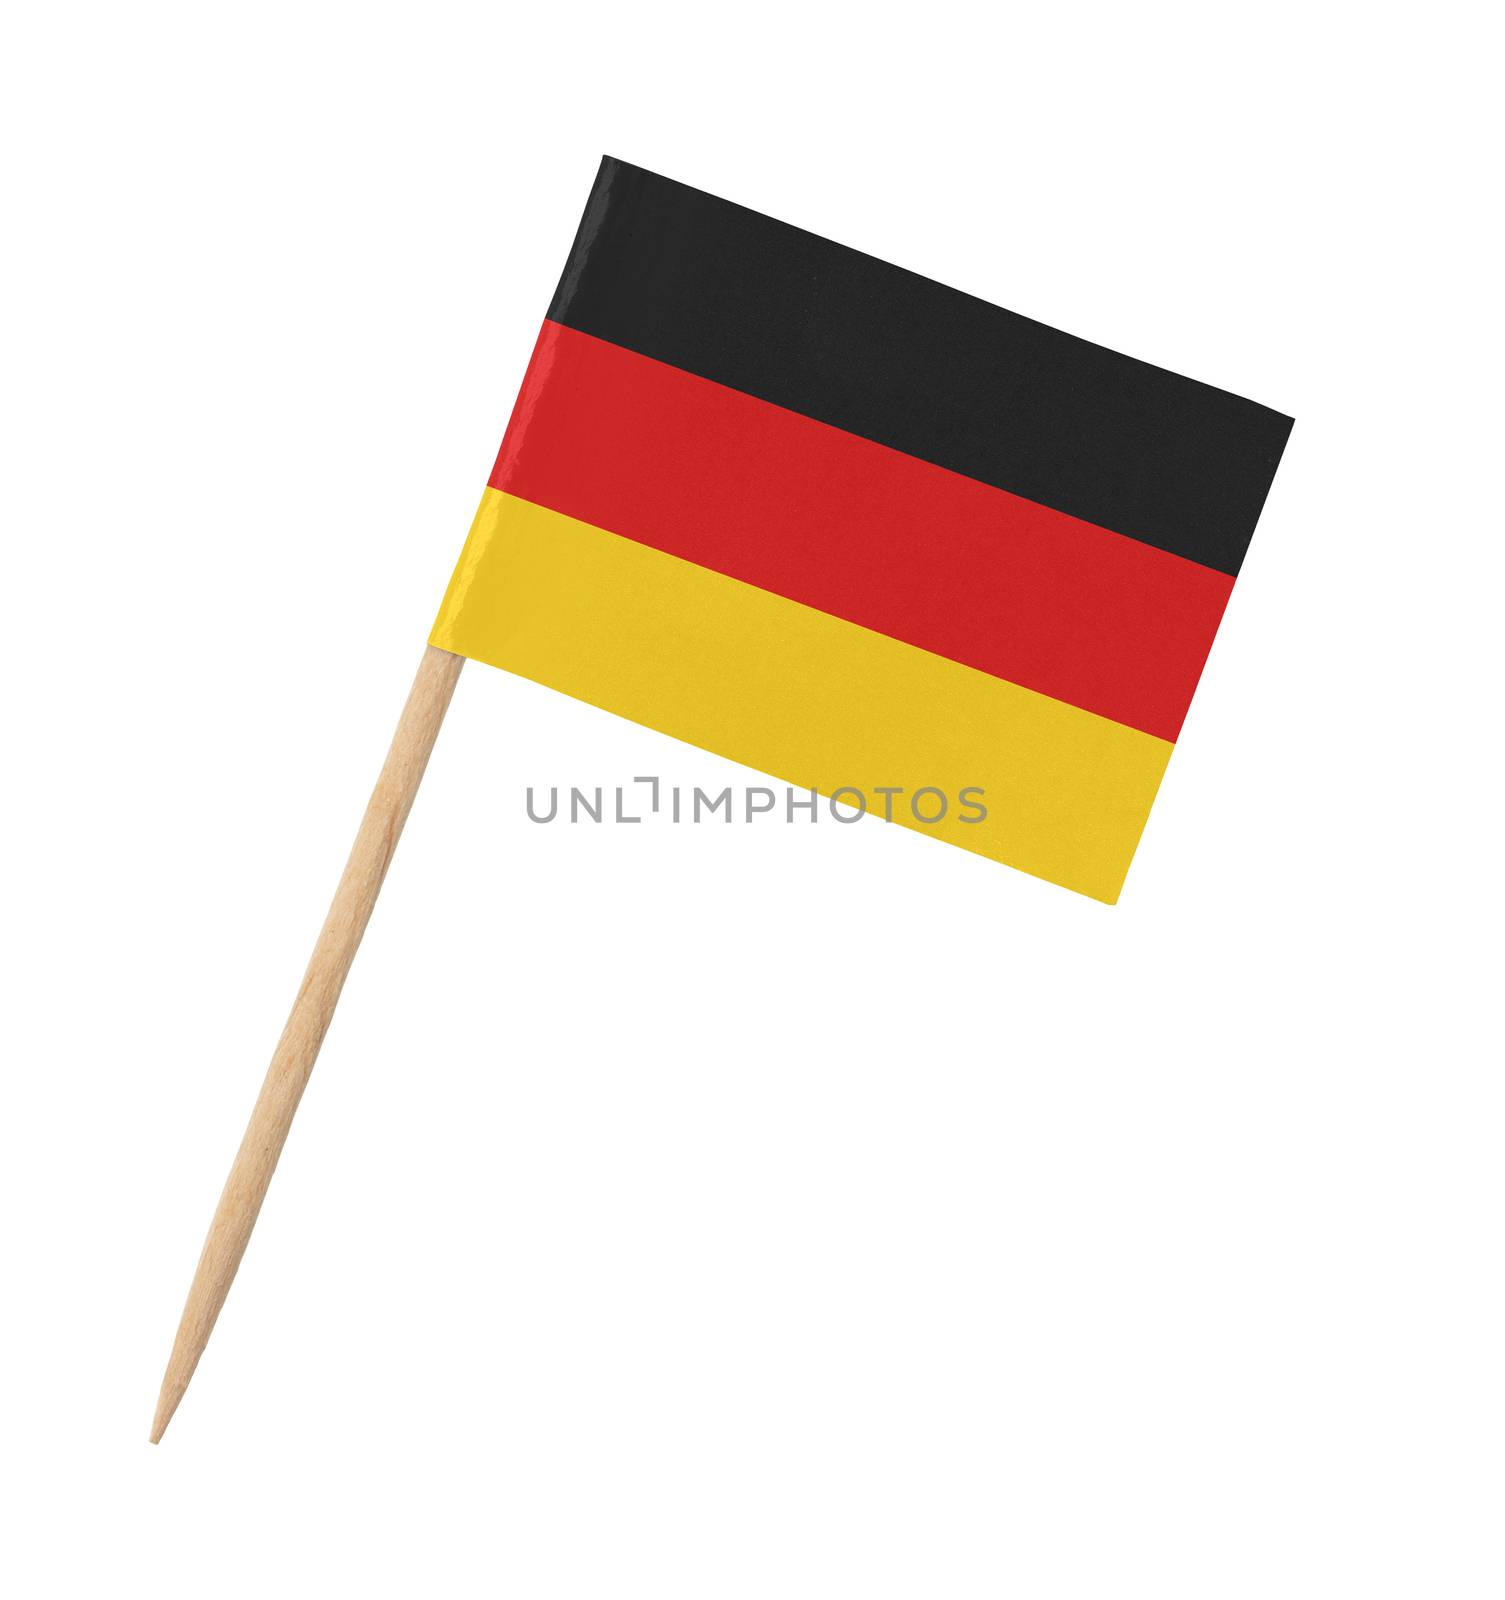 Small paper German flag on wooden stick, isolated on white